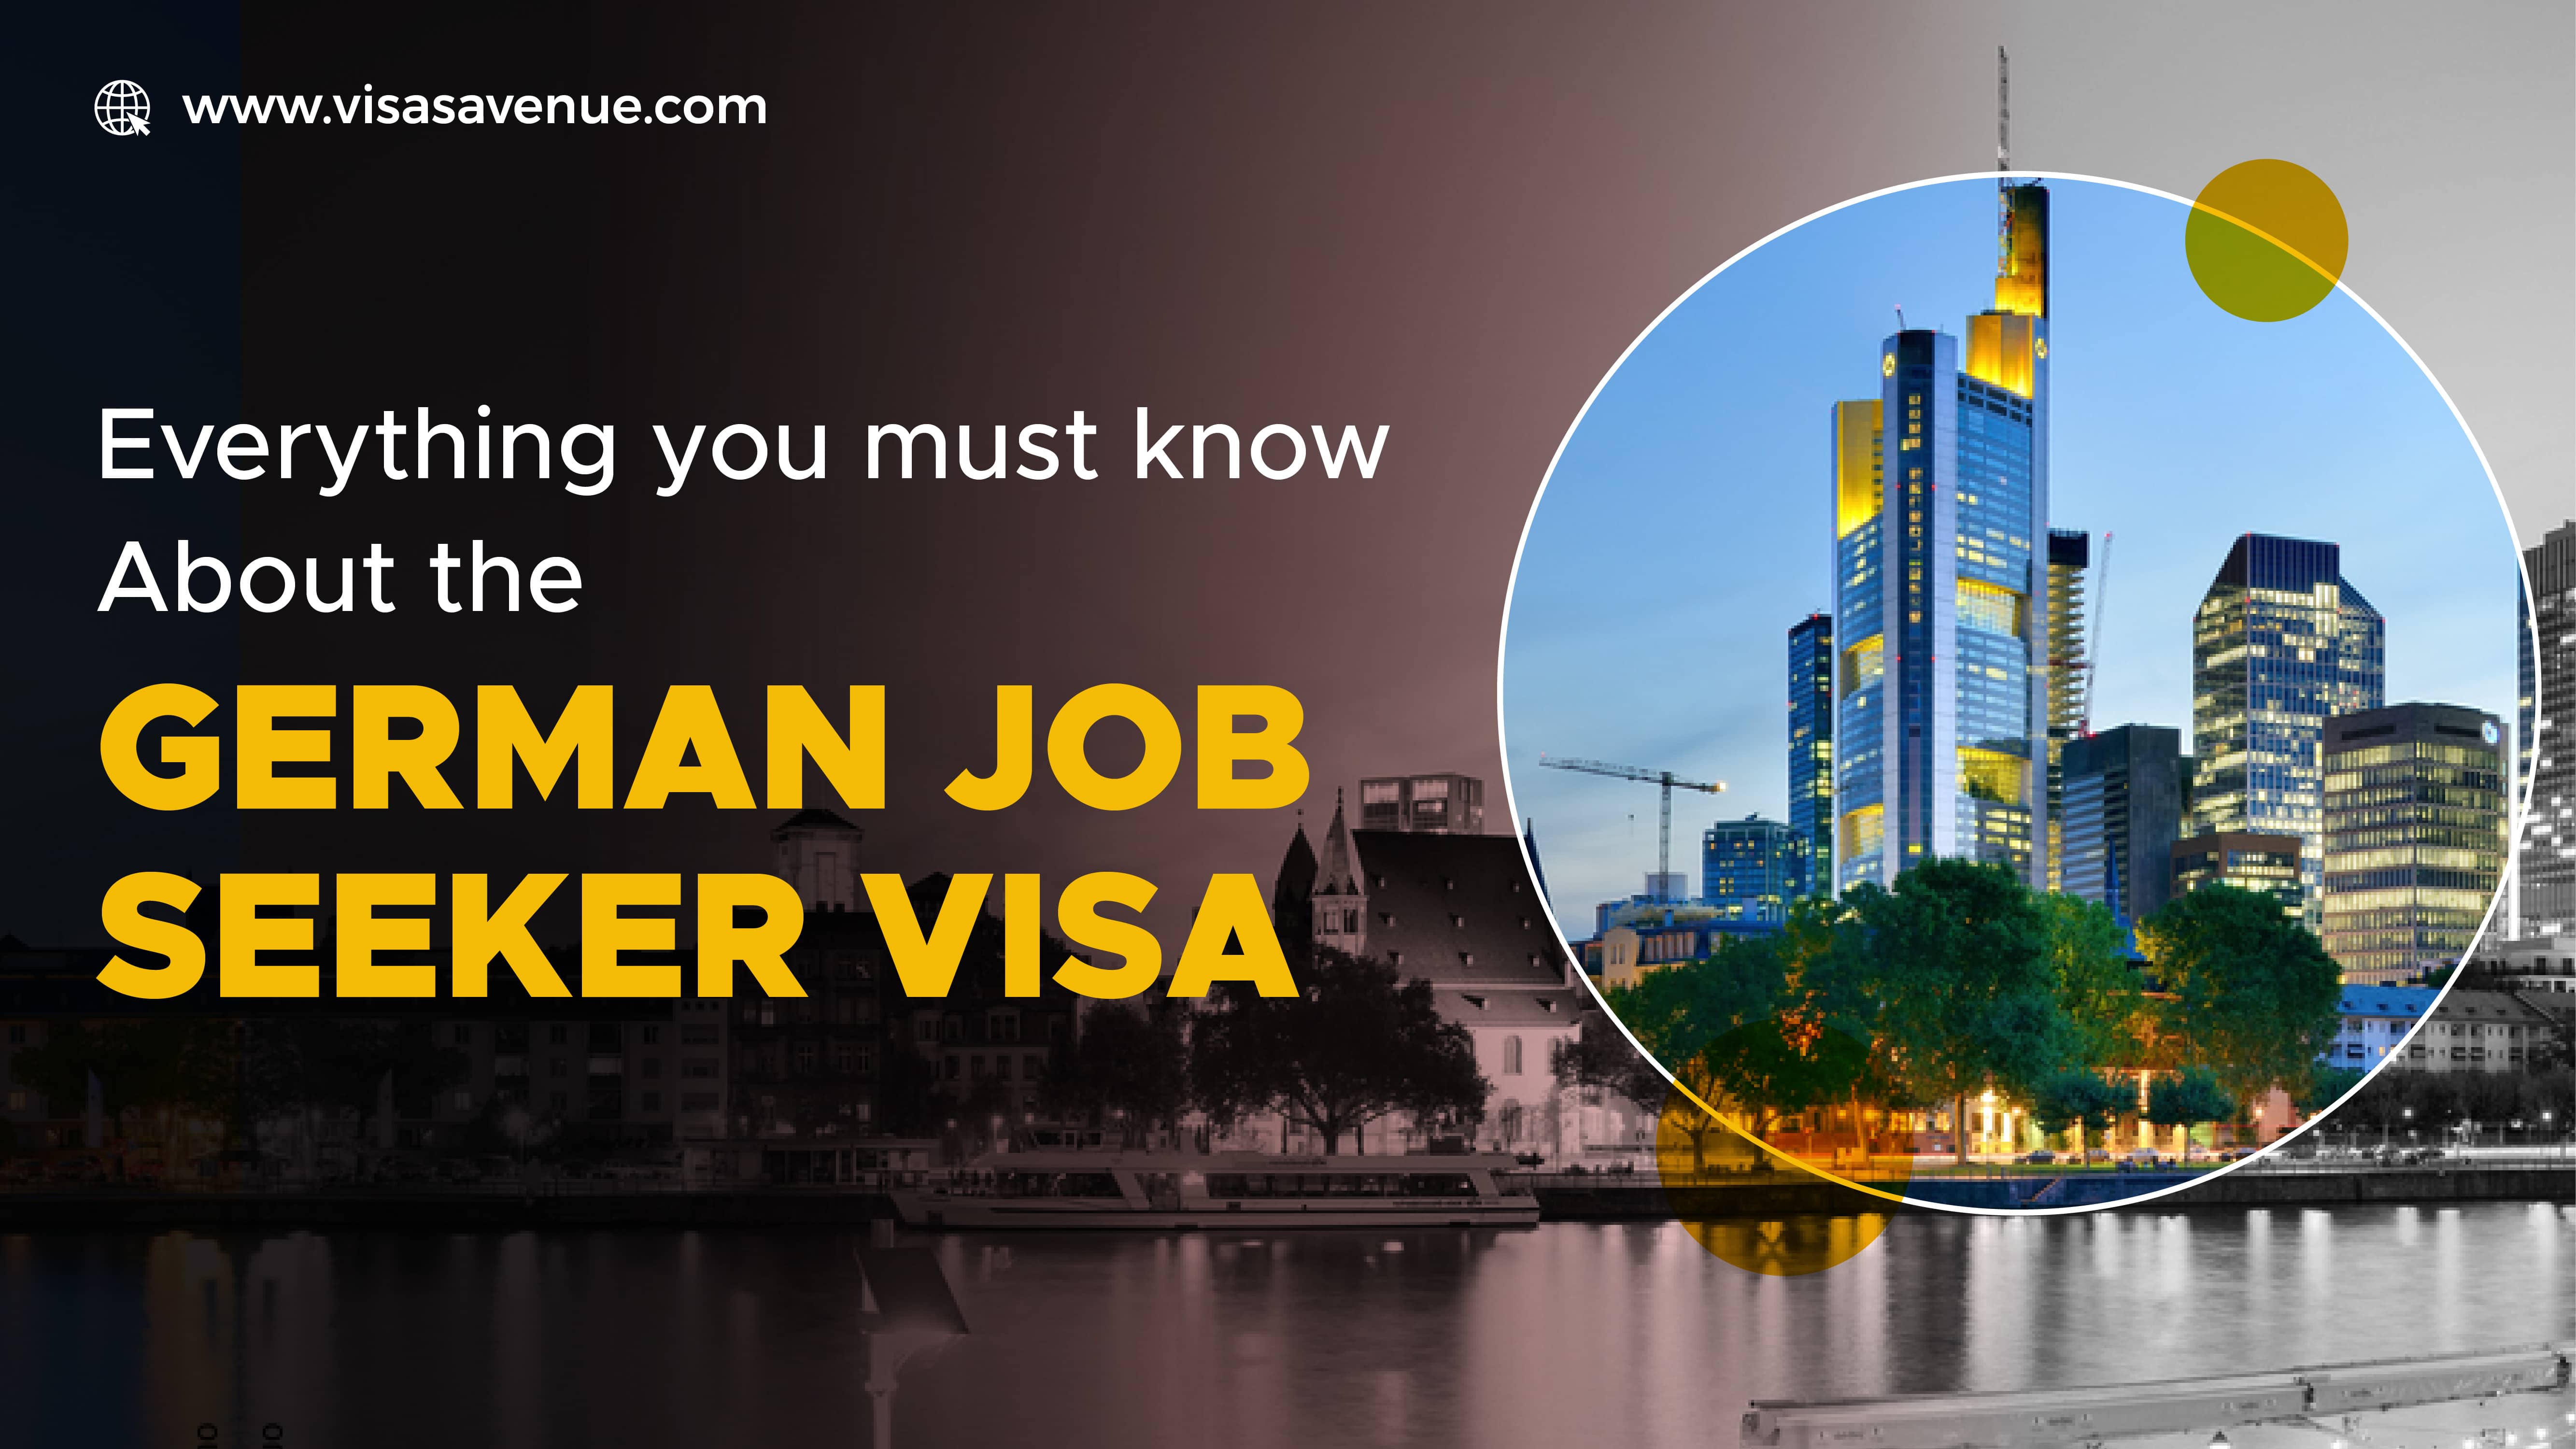 Everything you must know about the German Job Seeker Visa